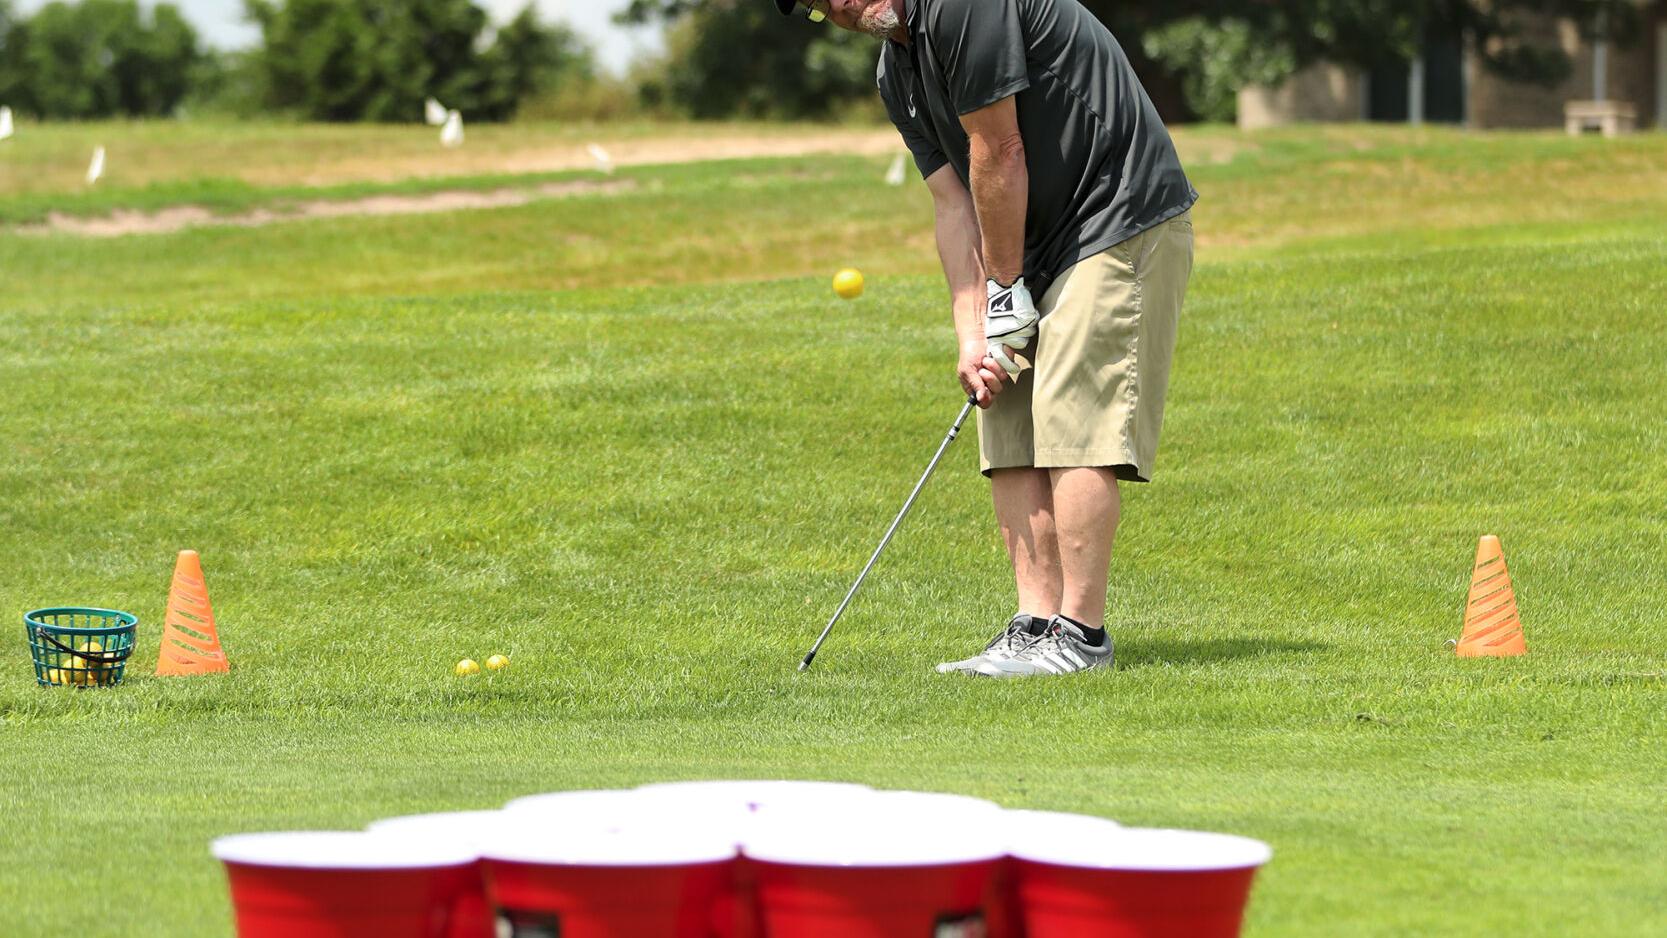 Right down the fairway: Sunheat charity golf tournament in its 16th year